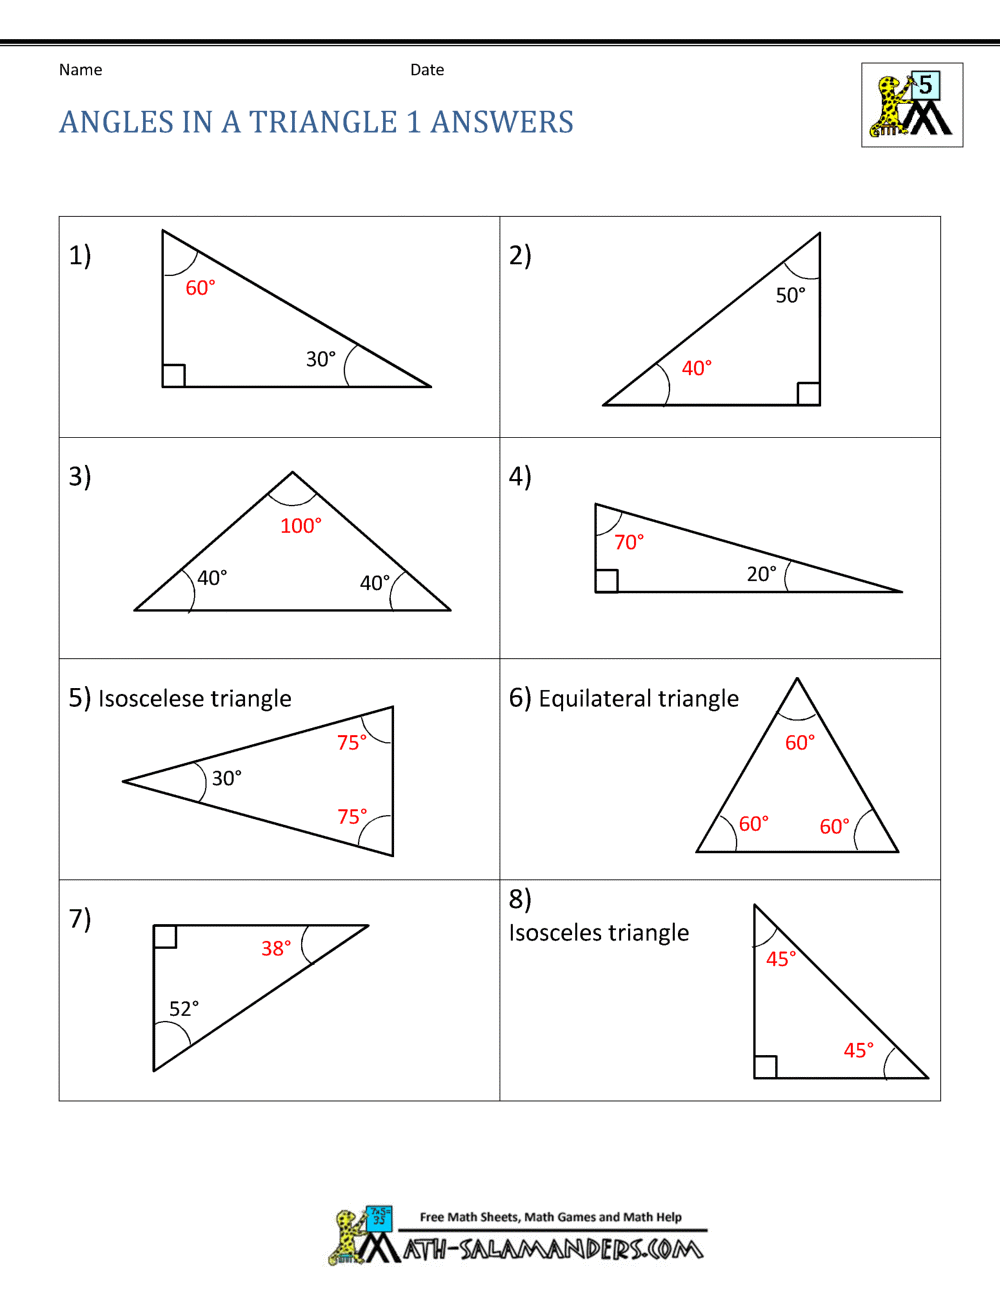 11th Grade Geometry For Triangle Interior Angles Worksheet Answers